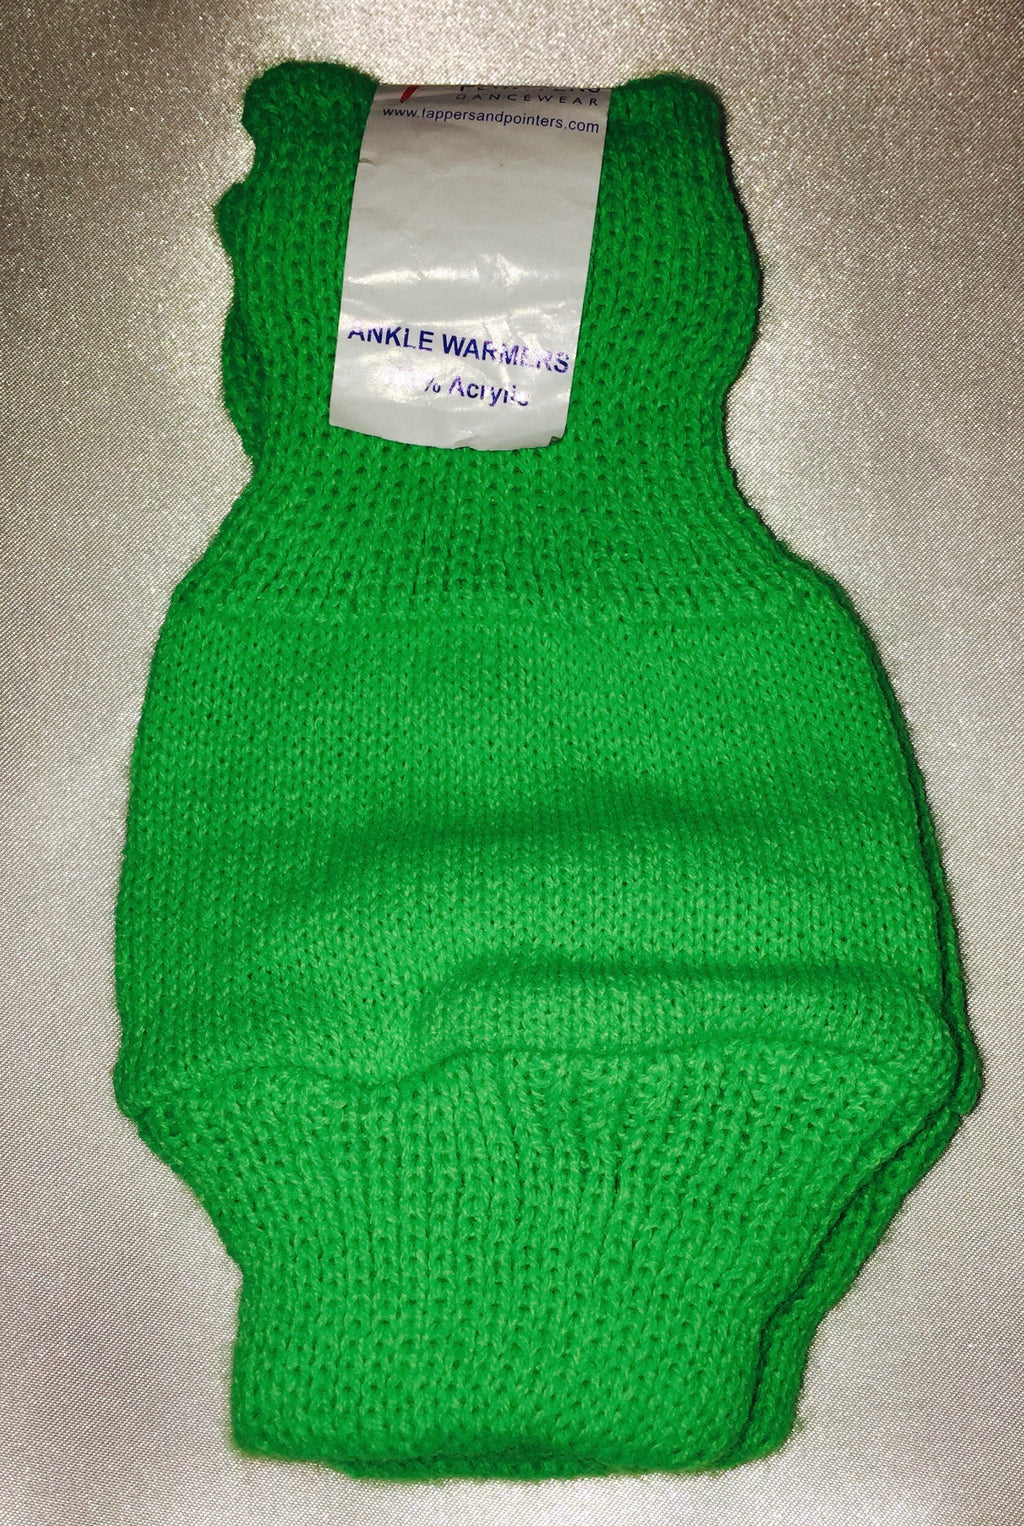 Green Children's Ankle Warmers